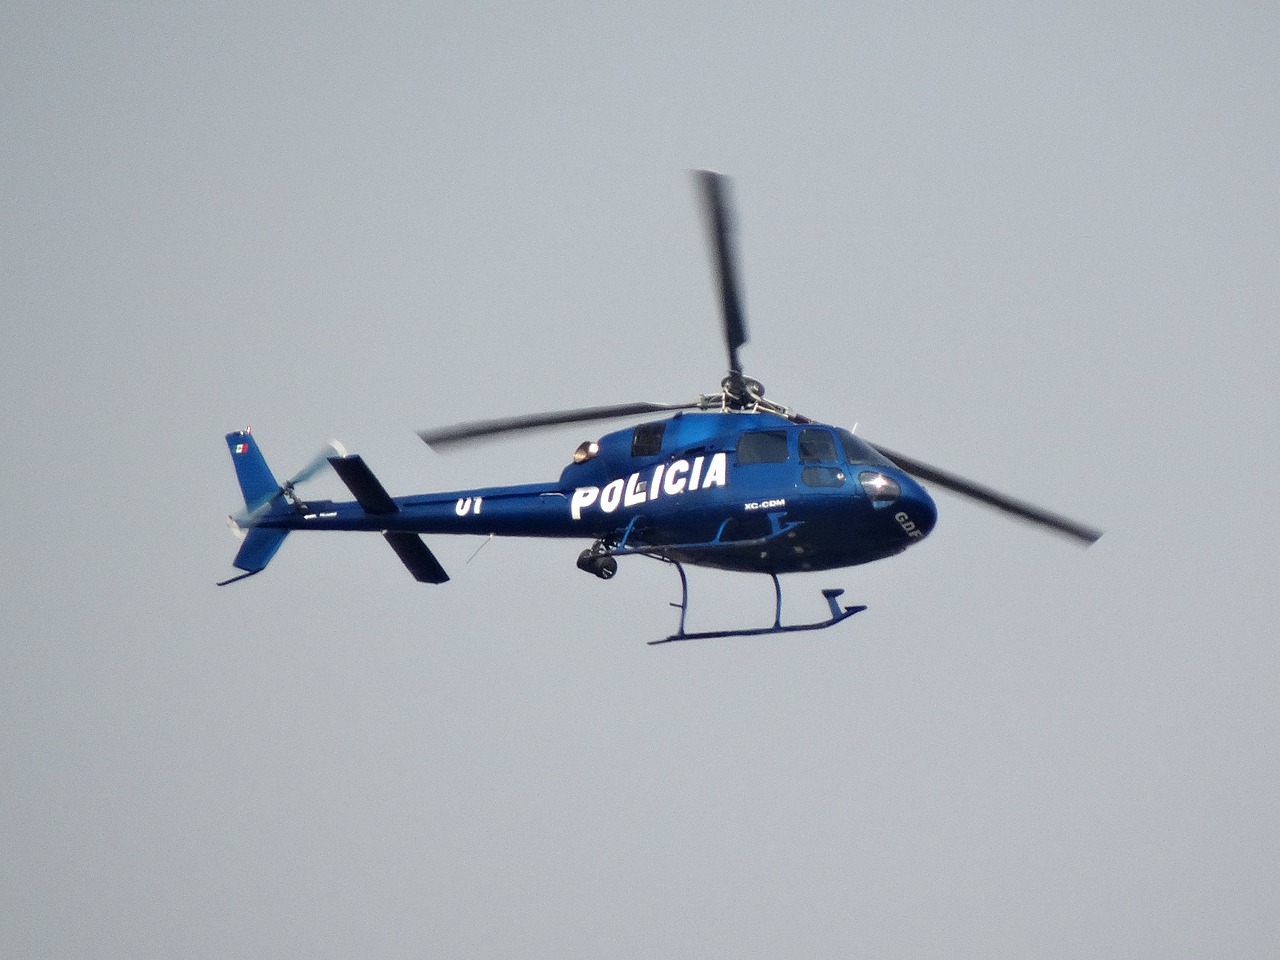 police transport aircraft free photo